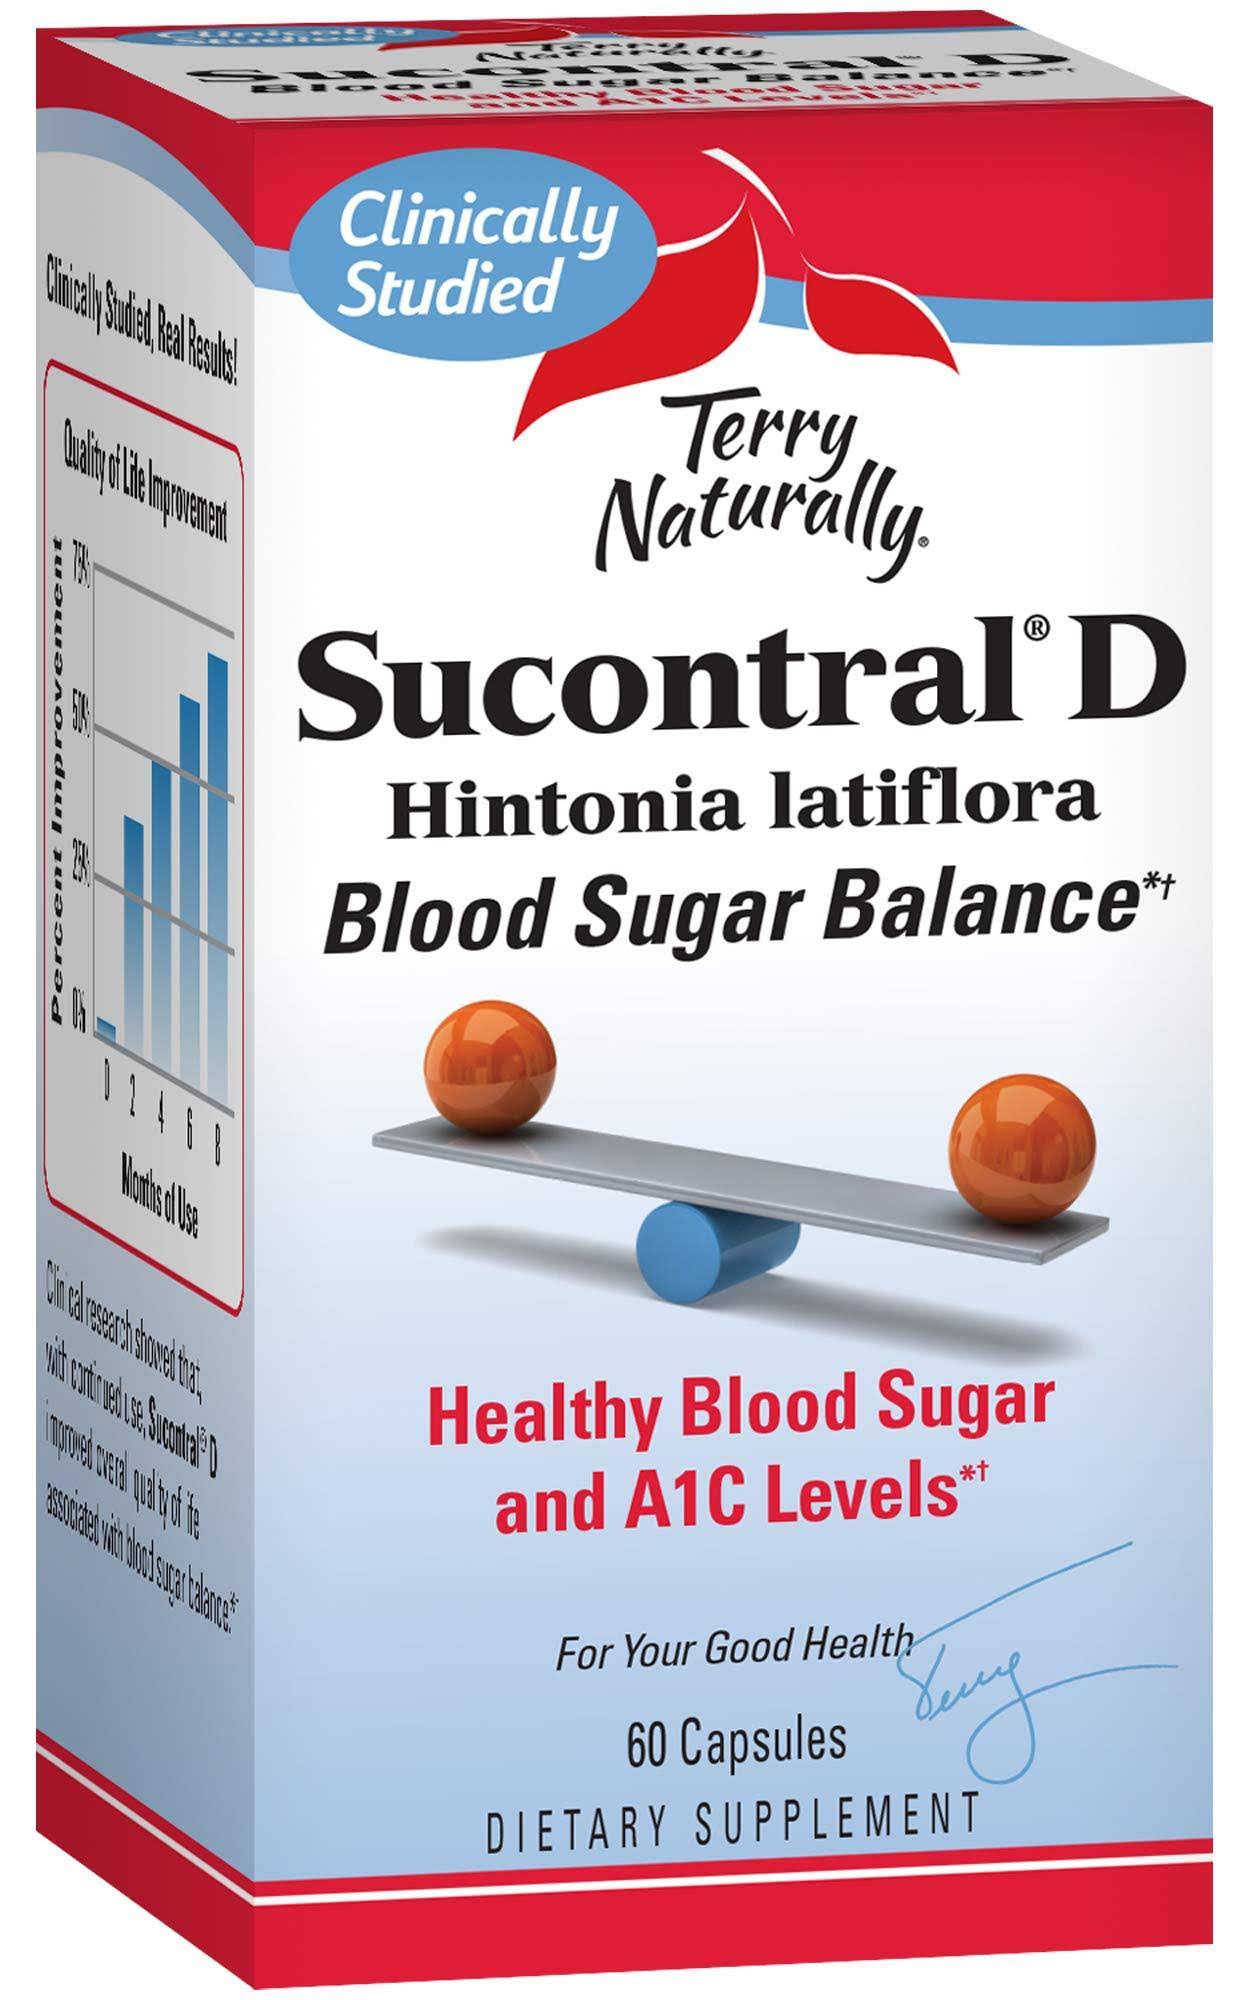 EuroPharma Terry Naturally Sucontral D Blood Sugar Balance Supplement - 60 Capsules